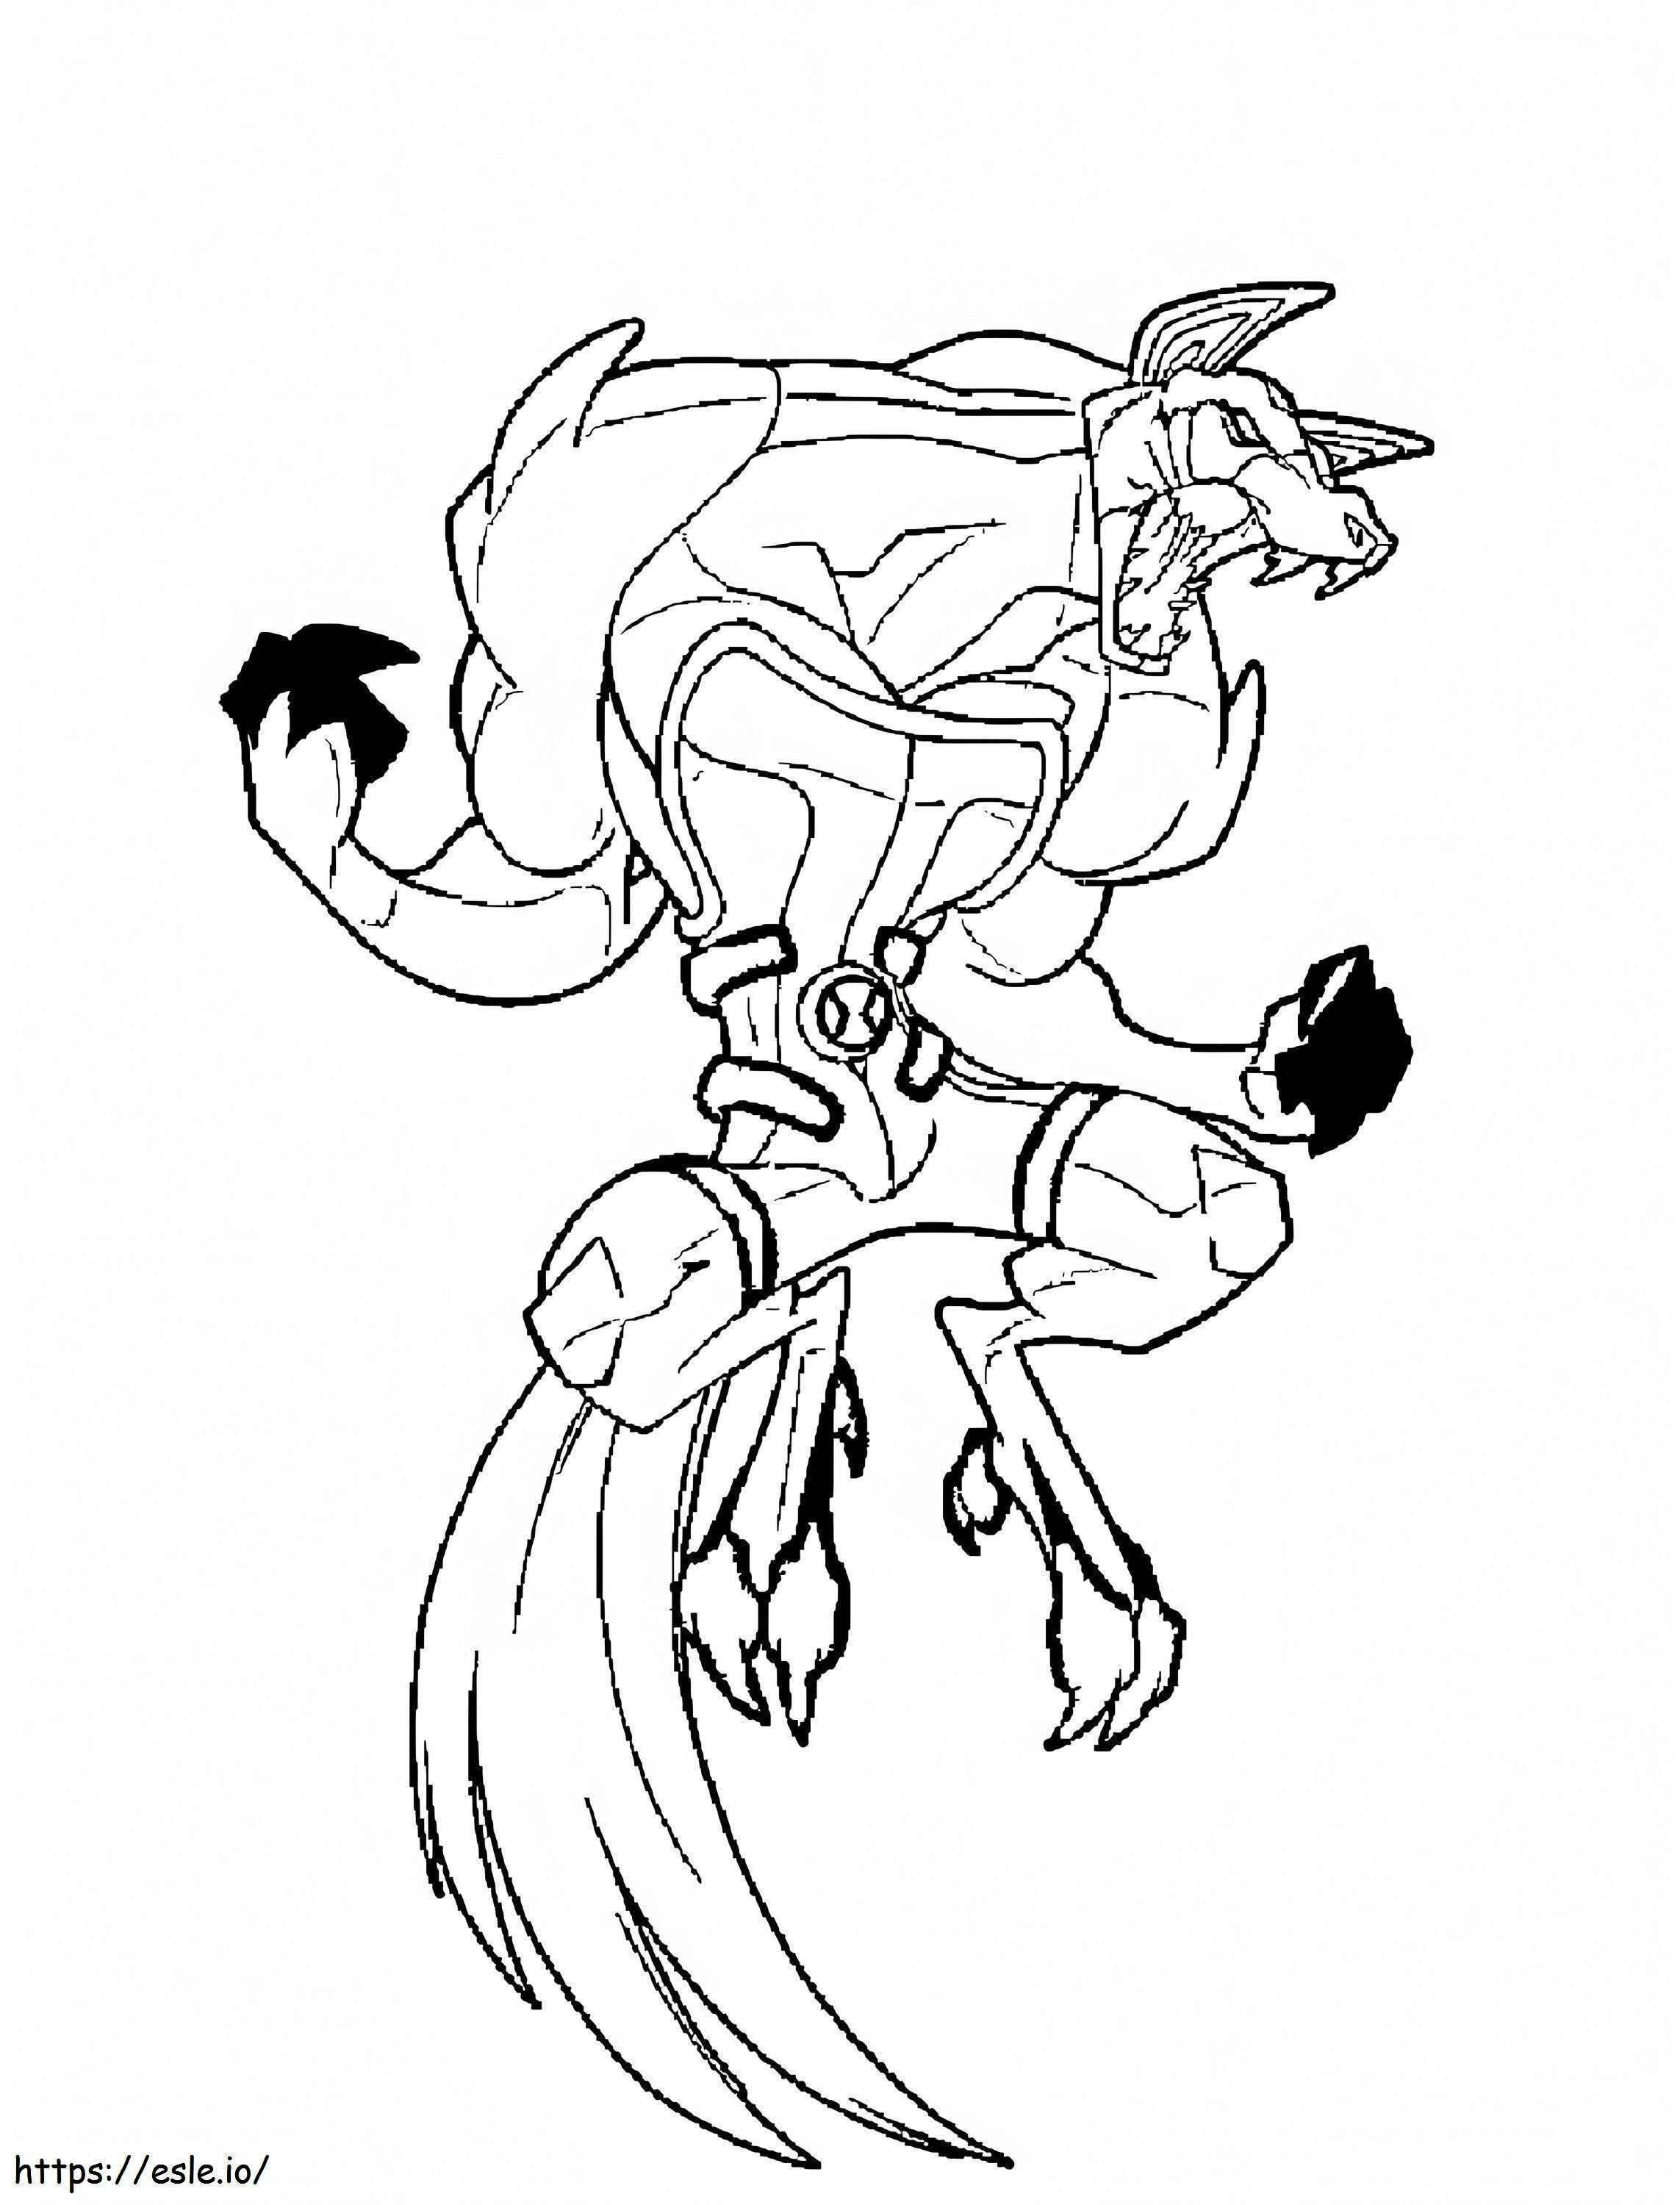 1542162672 Ben 10 43 coloring page